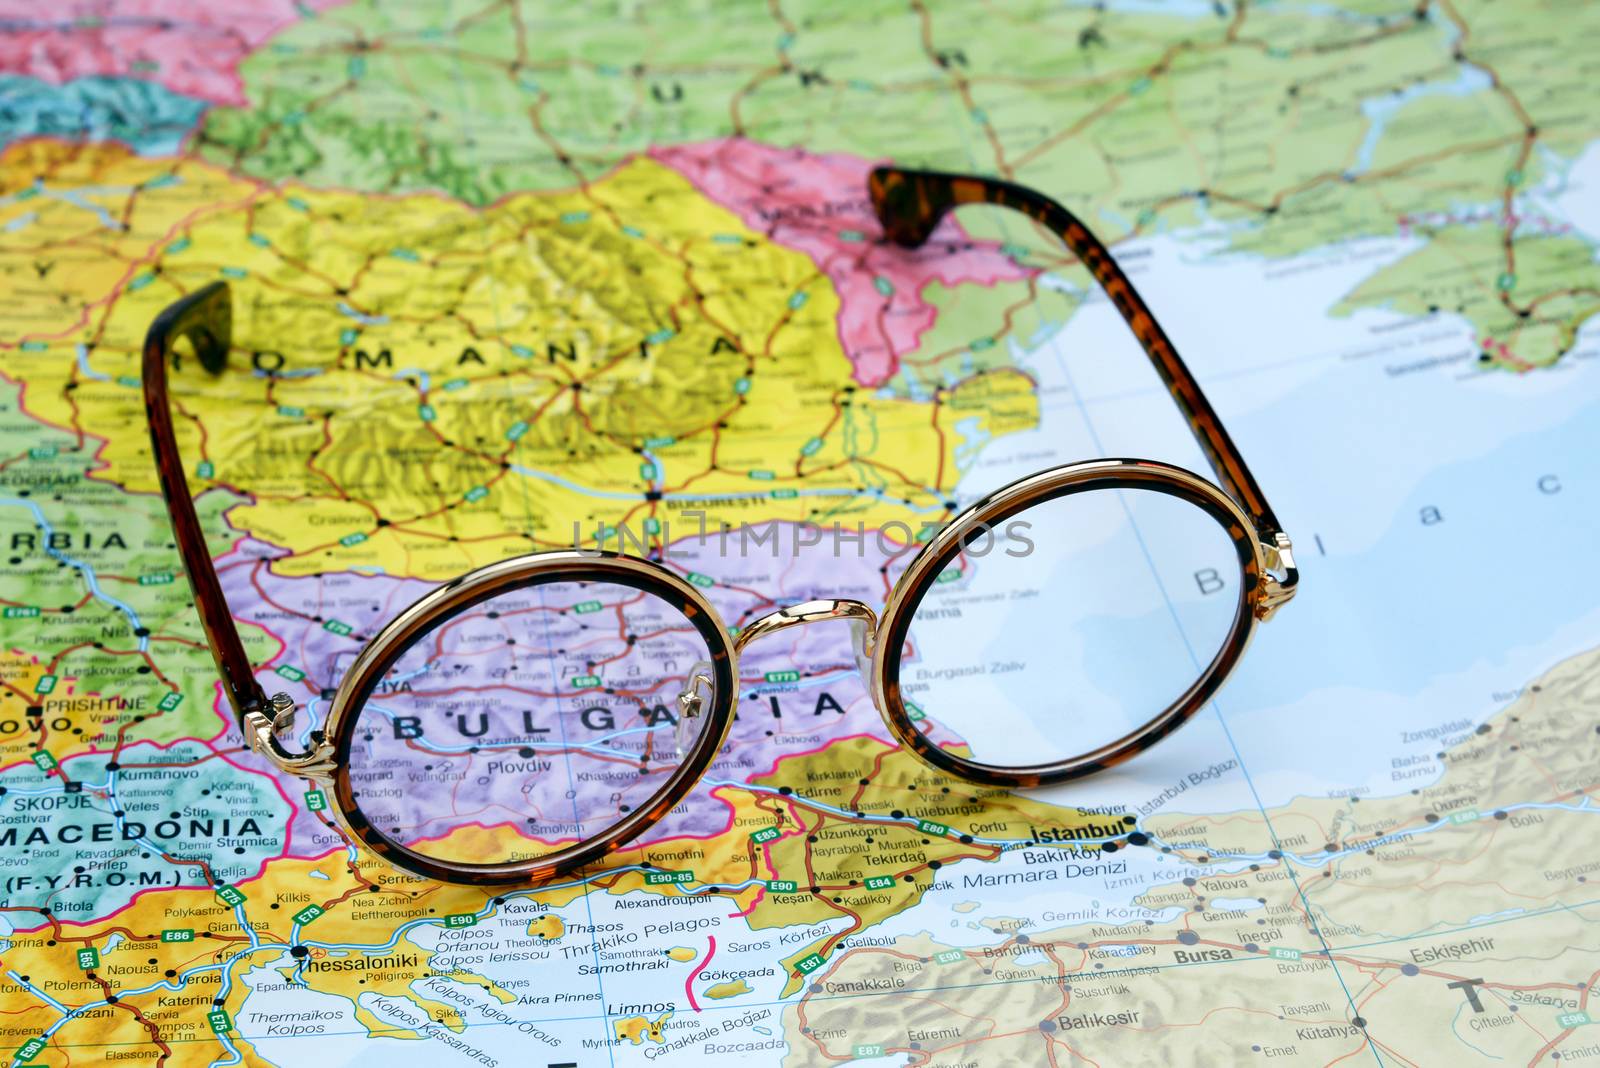 Photo of glasses on a map of europe. Focus on Bulgaria. May be used as illustration for traveling theme.